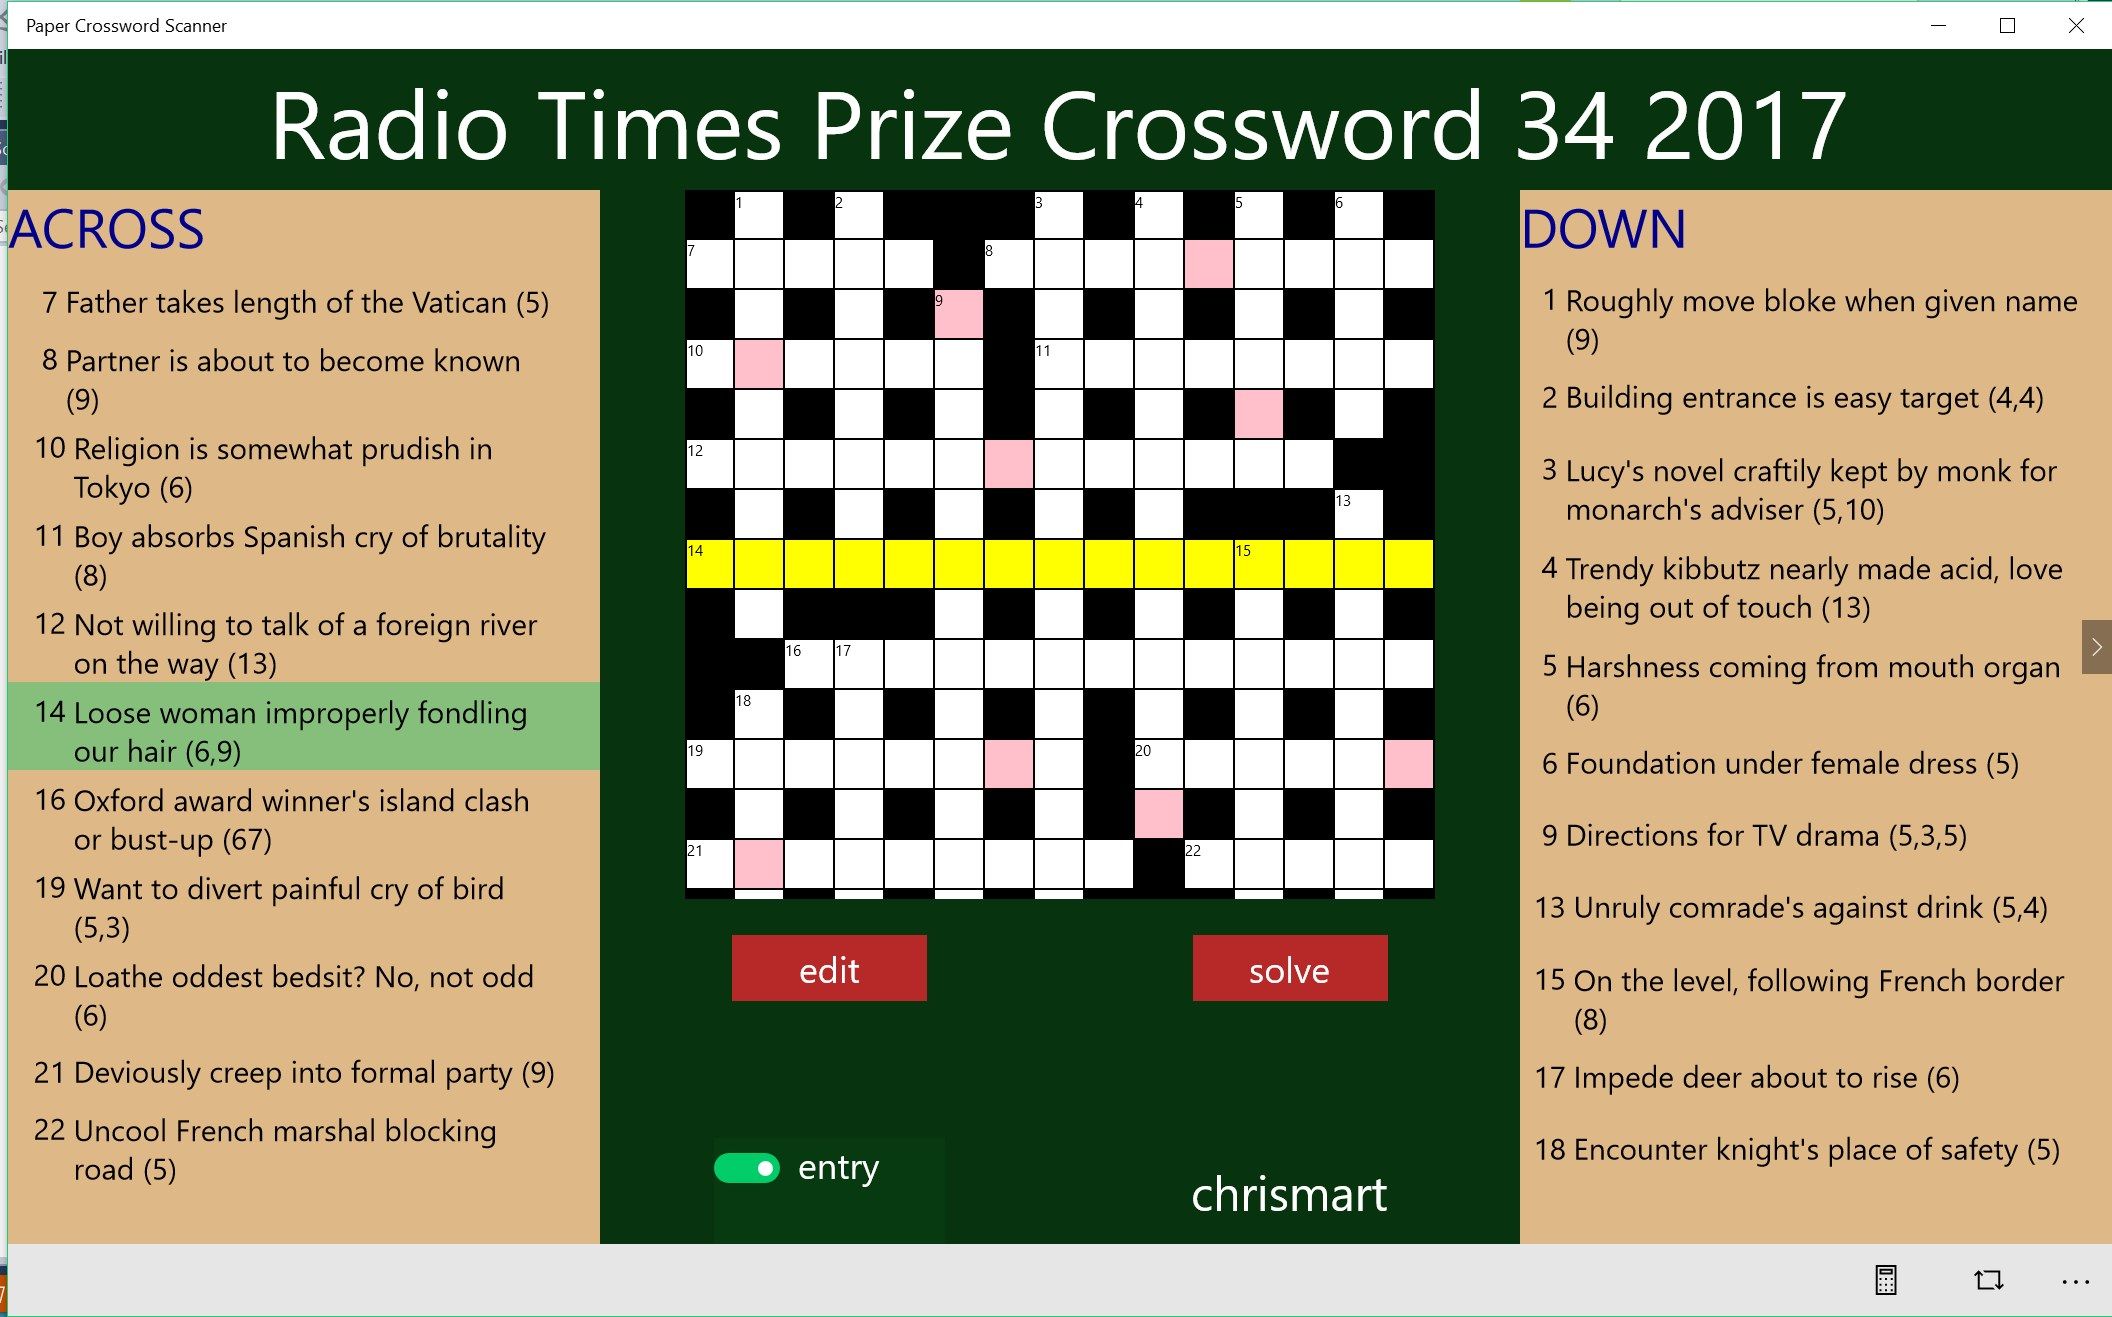 When the clues and grid match one another you can begin to solve the crossword.